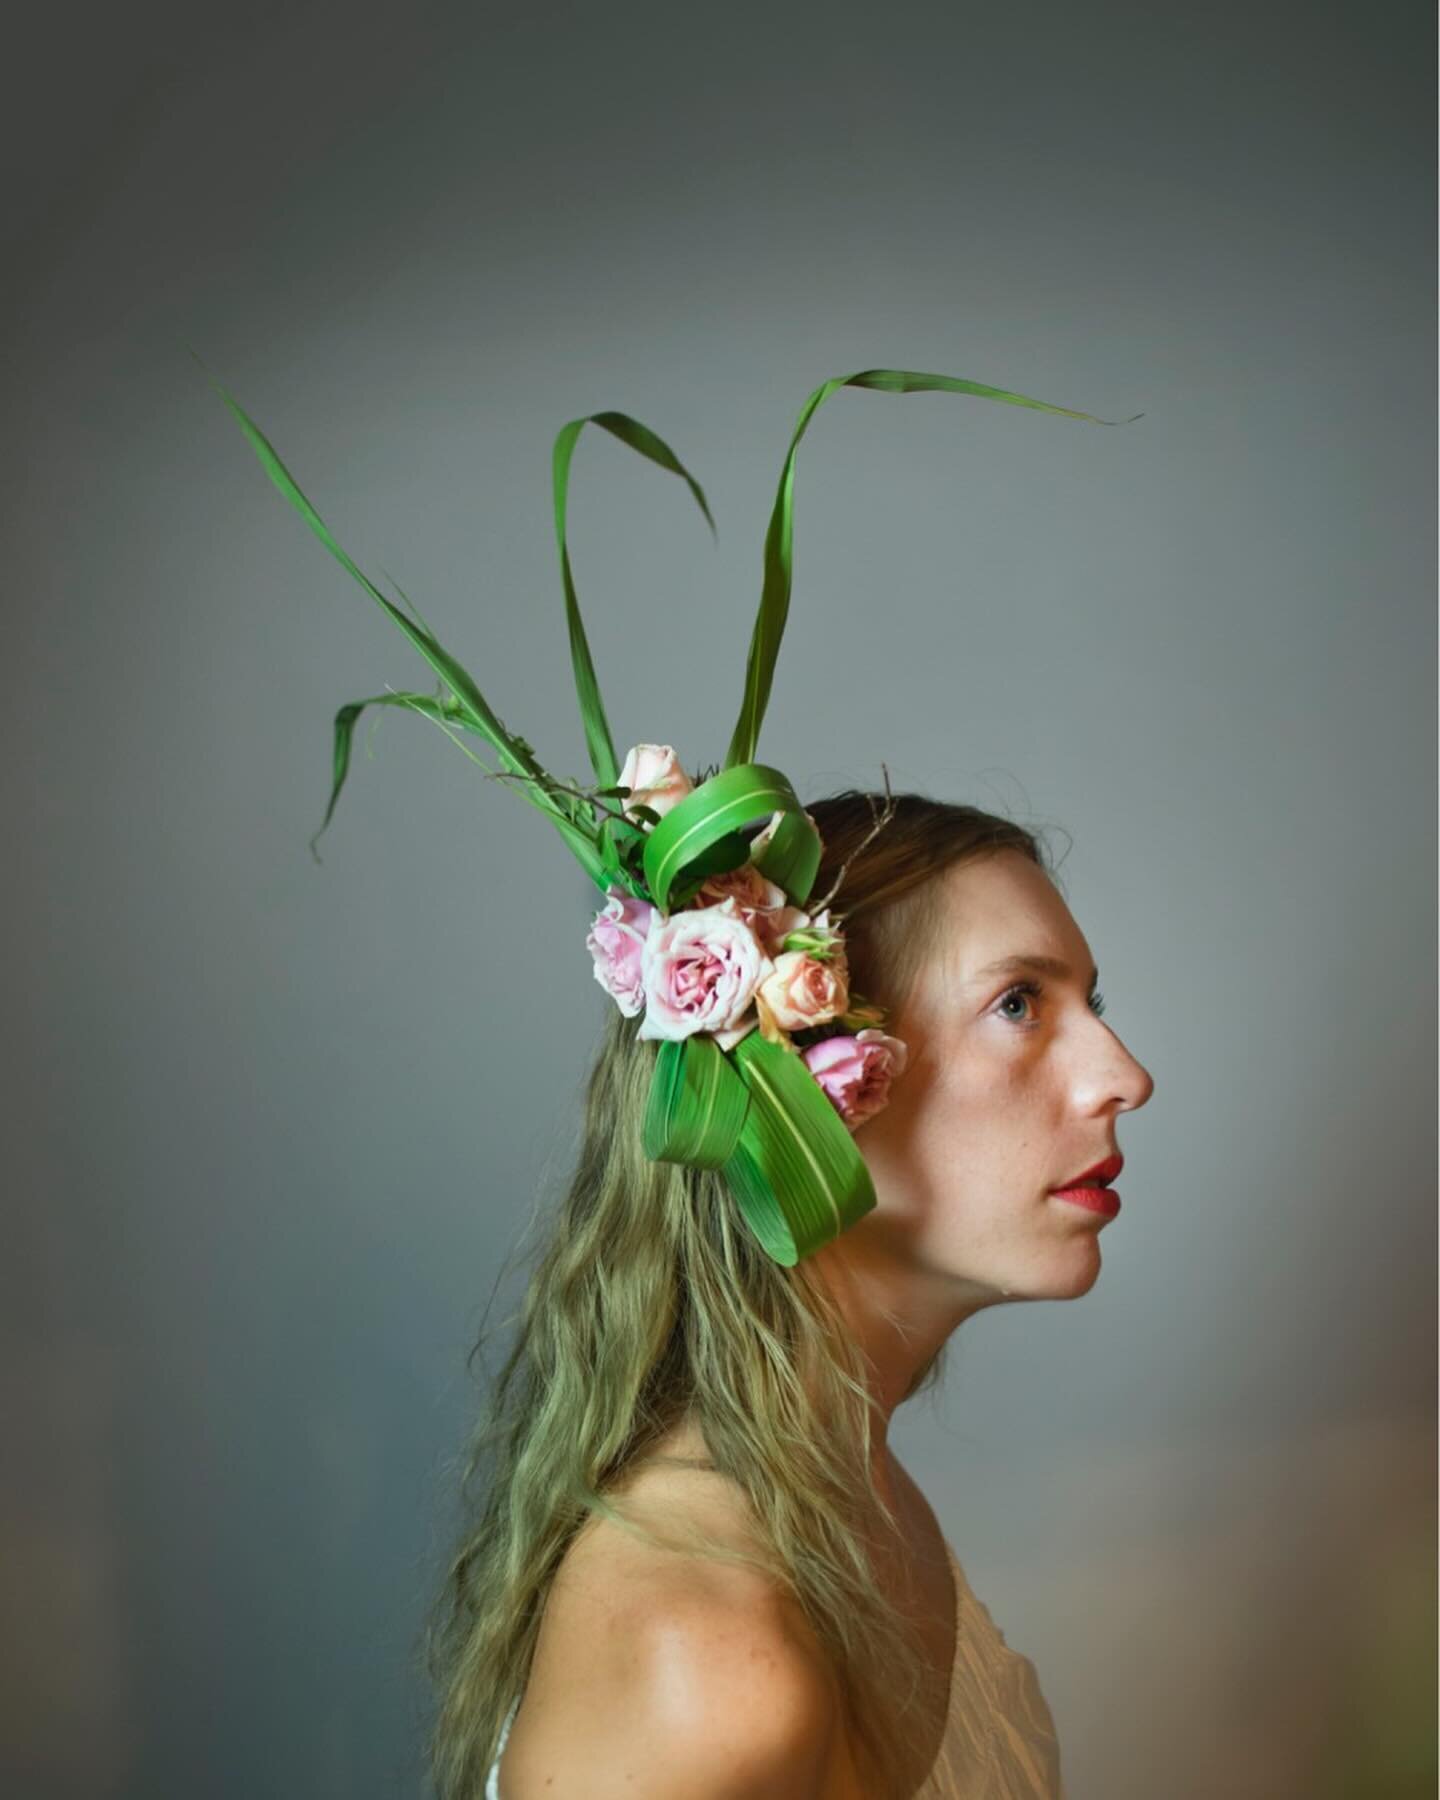 Presenting Costume Bloom: a workshop series I will be teaching this spring at the beloved @chu.chi.cho !!!! If you&rsquo;ve ever been curious about centering or incorporating real flowers into your costume or everyday look, this class is for you. Beg